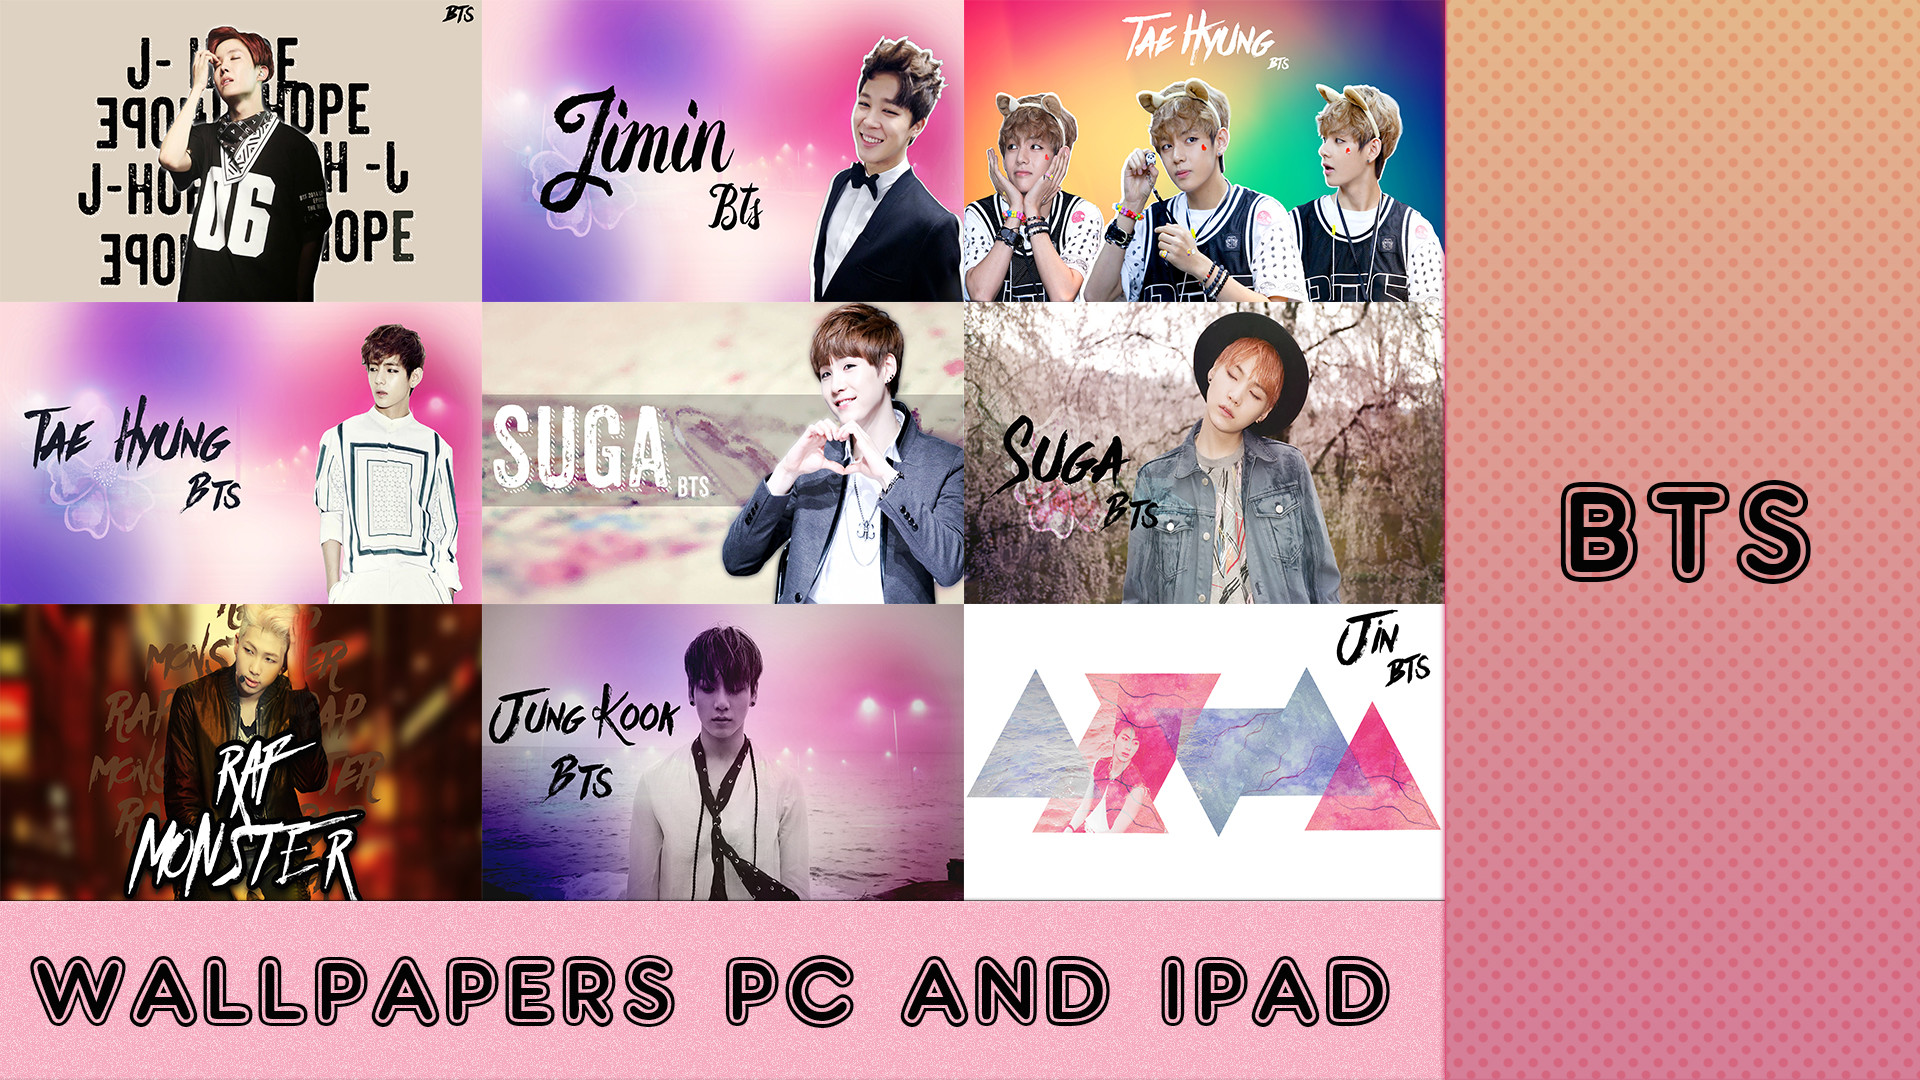 1920x1080 Pack Wallpapers BTS by Utsukushi08 Pack Wallpapers BTS by Utsukushi08